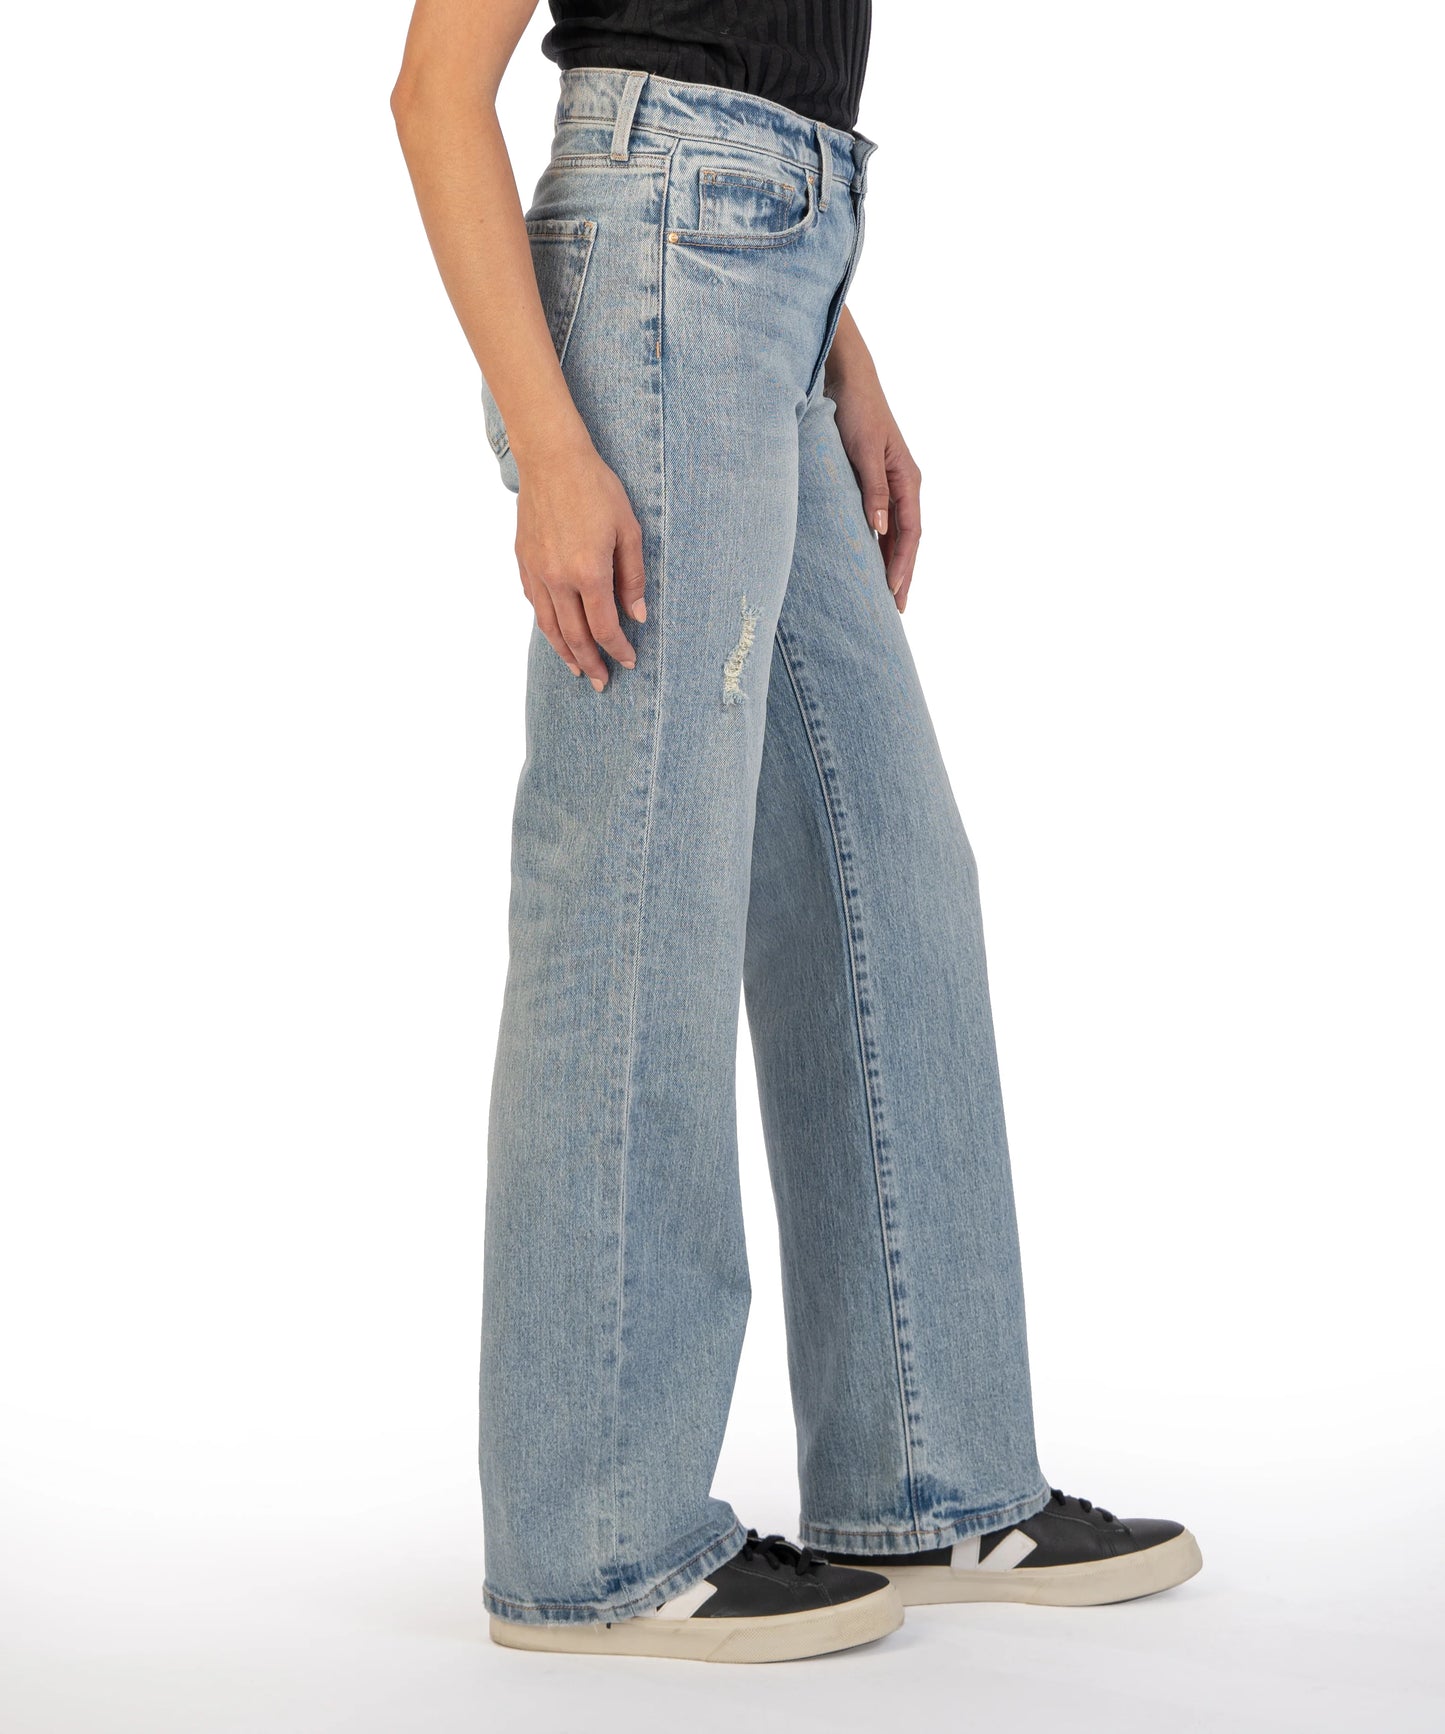 Kut from the Kloth Miller High Rise Wide Leg Candescent Jeans